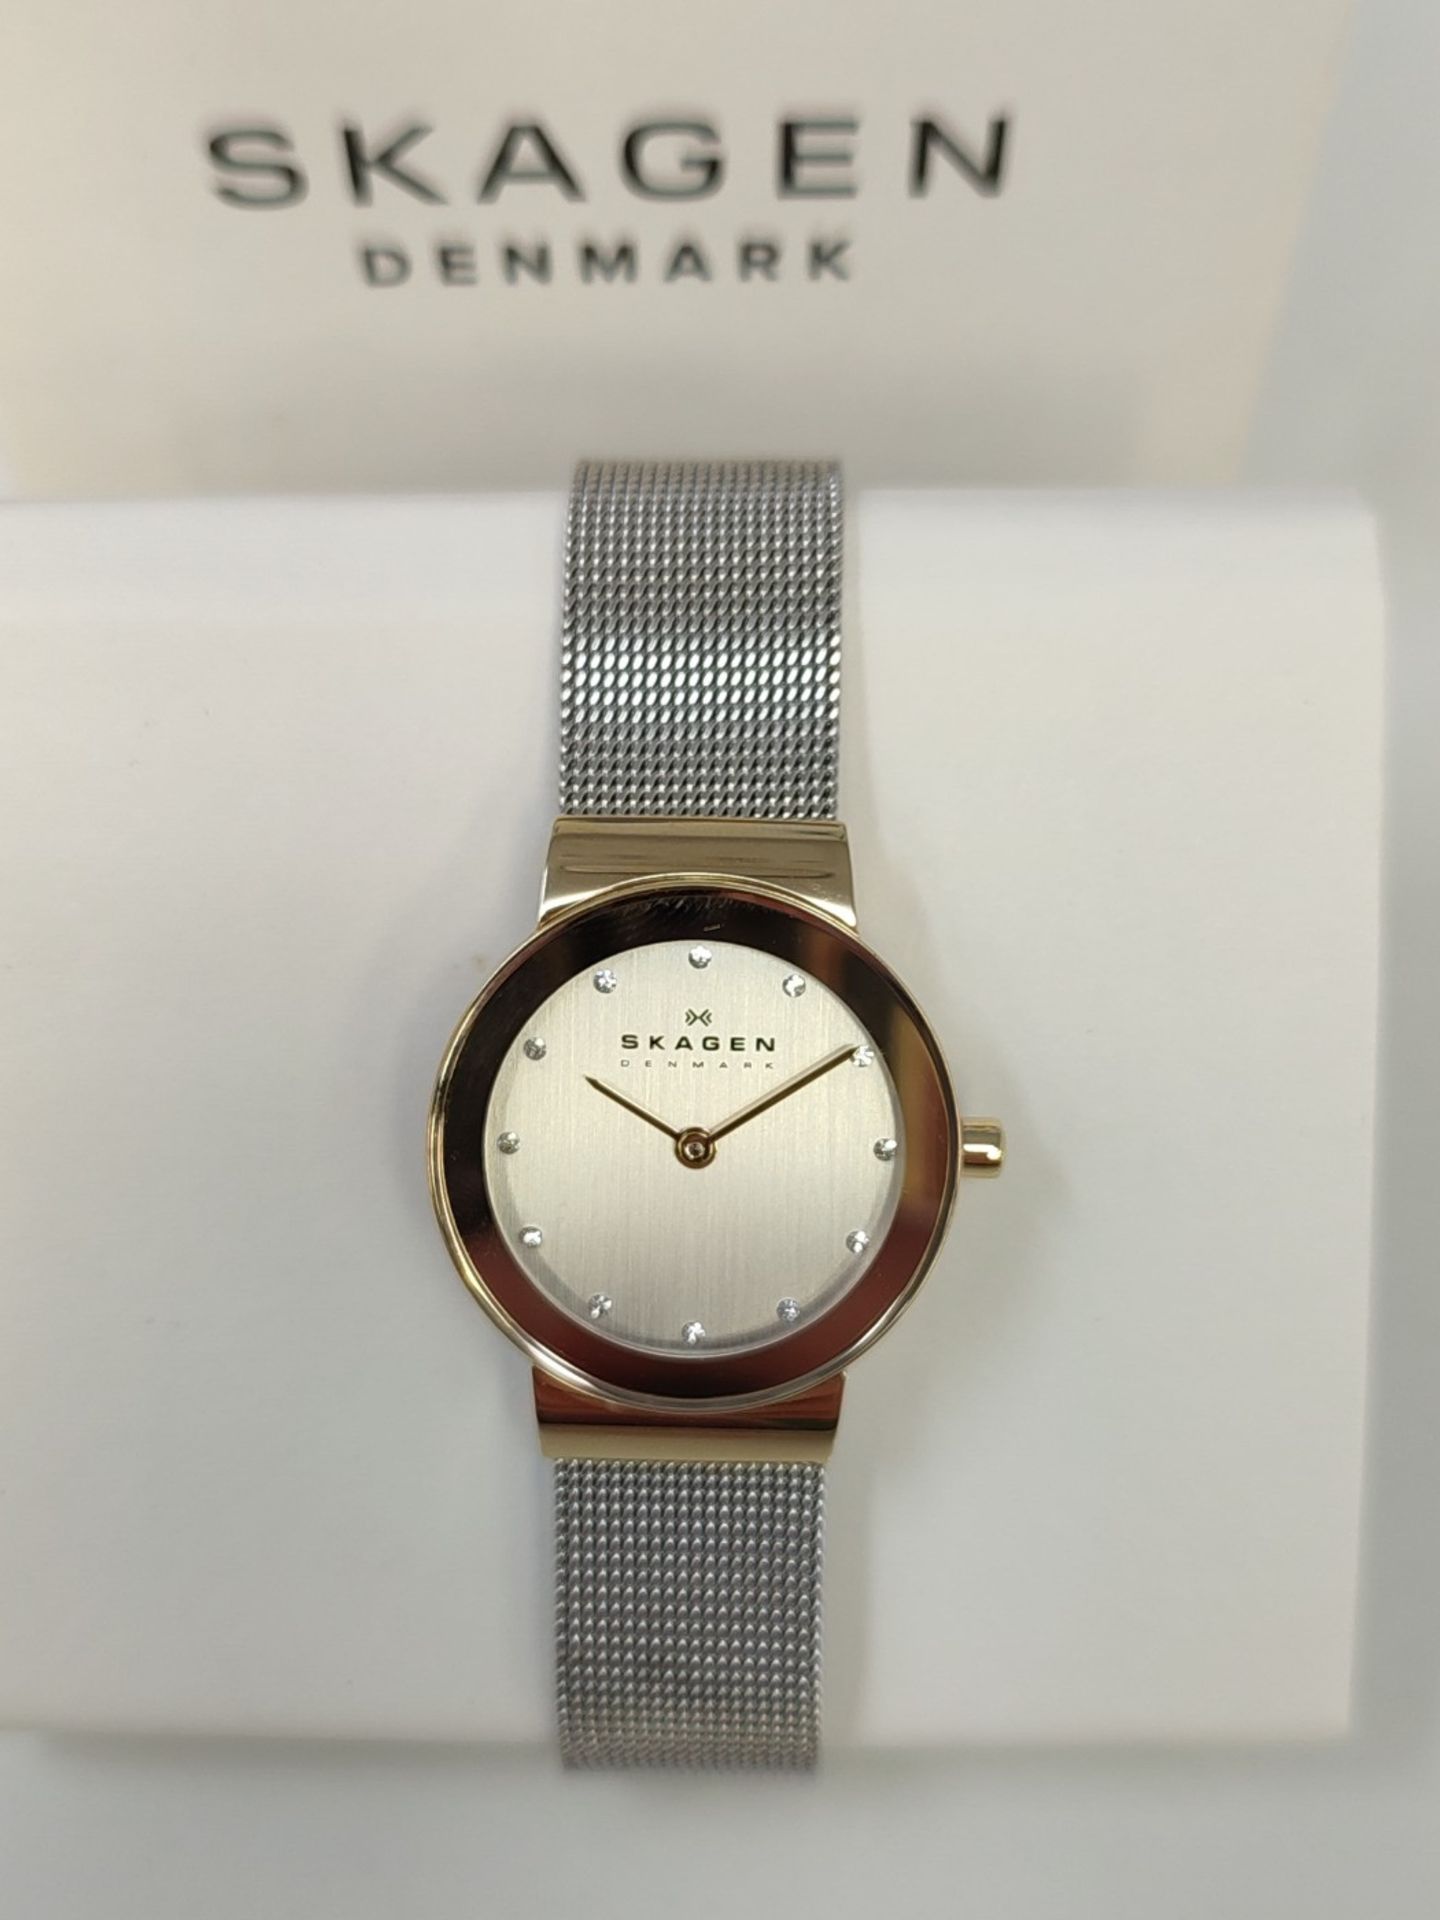 RRP £55.00 Skagen women's watch Freja Lille, two-hand movement, 26mm gold stainless steel case wi - Image 2 of 3